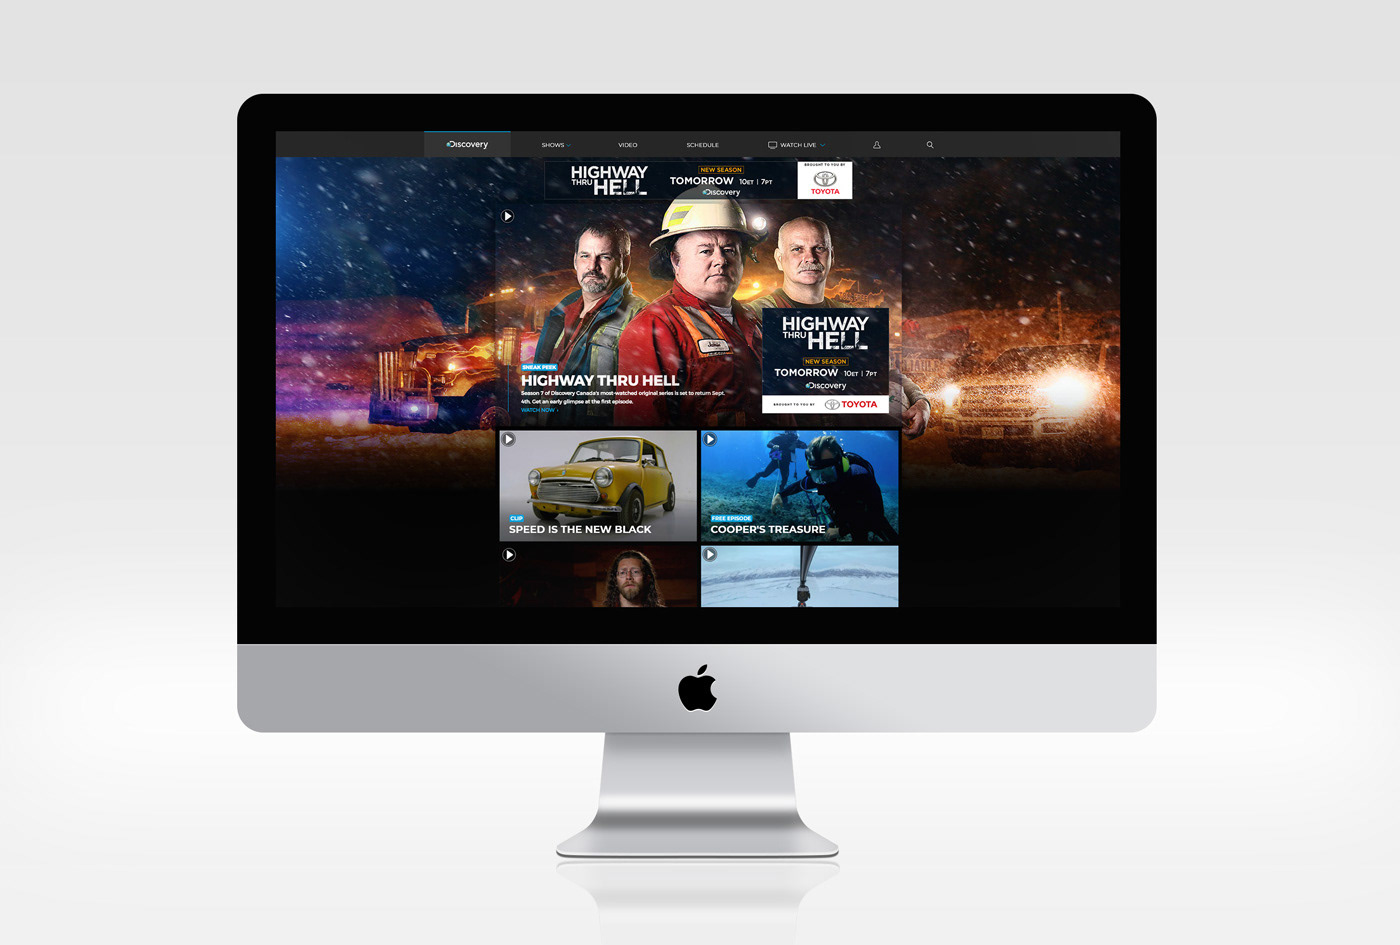 Highway Thru Hell tvshow Entertainment discovery Cable marketing   Social banners keyart digital campaign Bell Media